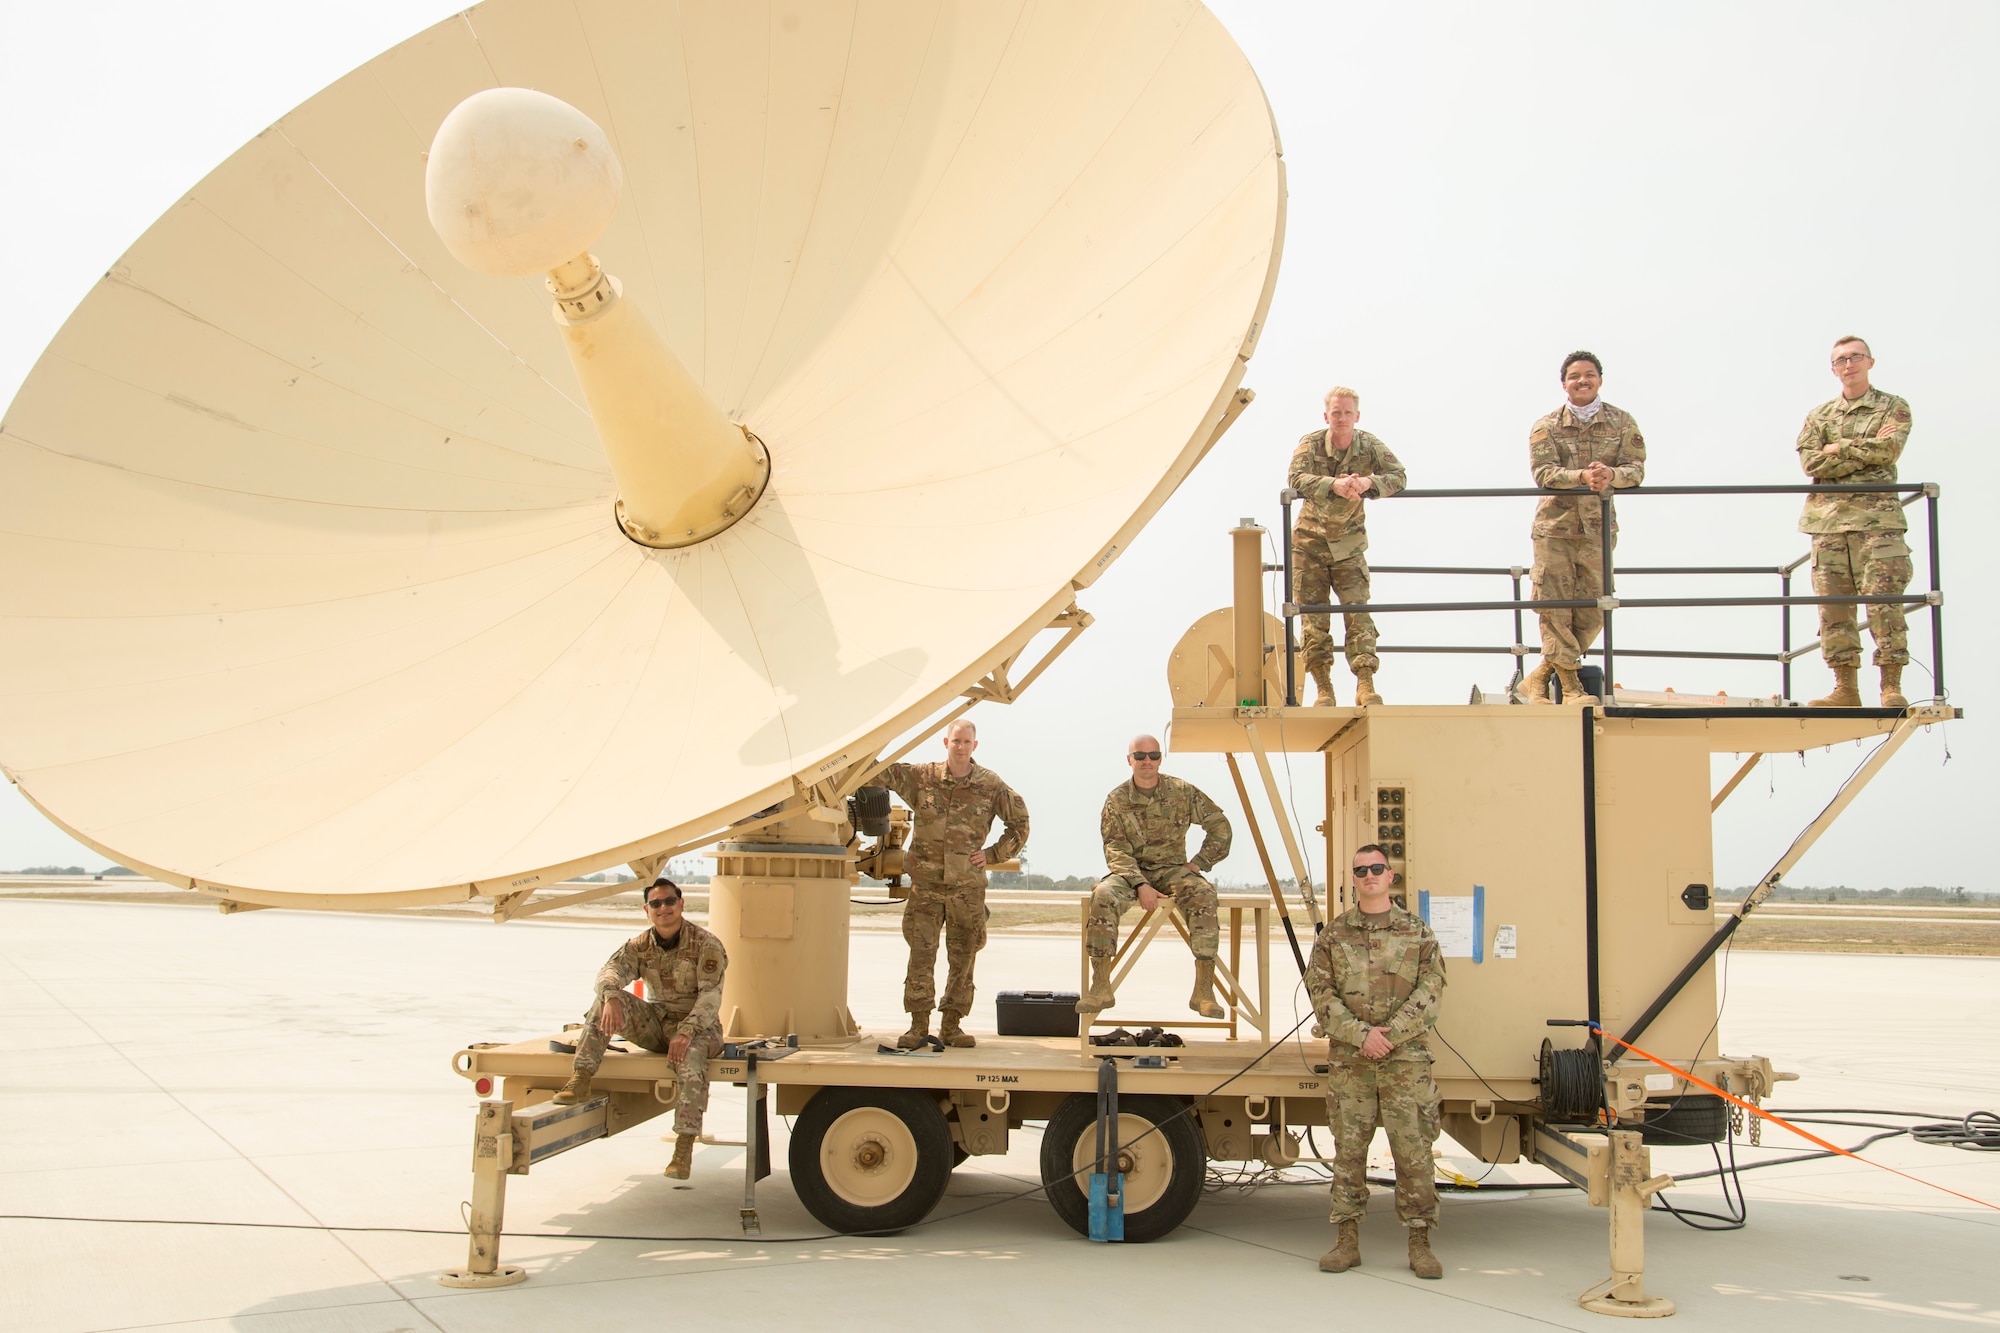 Members from Holloman Air Force Base pose with a satellite earth terminal subsystem during Agile Reaper on September 8, 2020, at Naval Air Station Point Mugu, California. Agile Reaper is a routine training exercise focused on the movements of MQ-9s Reaper overwater to improve upon the joint relationship and operational capabilities while displaying agile penetrating and persistent multi-role maritime combat capabilities. (U.S. Air Force photo by Senior Airman Collette Brooks)